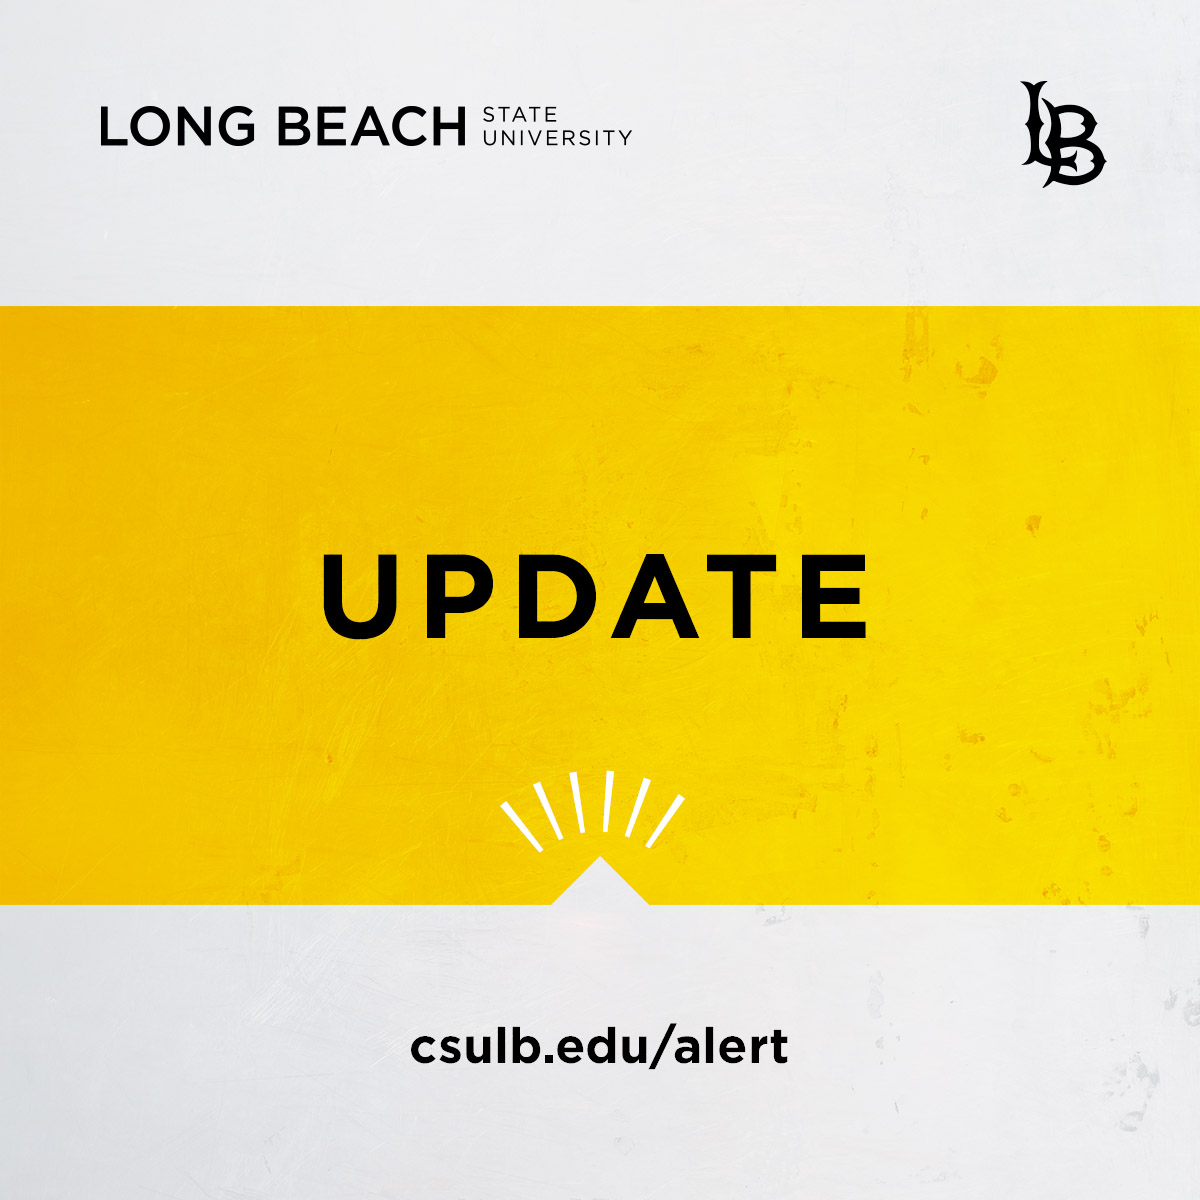 We anticipate a return to normal campus operations beginning on Tuesday. Students should contact their instructors — and employees should contact their direct supervisors — if any individual considerations need to be discussed. Please visit csulb.edu/alert for updates.